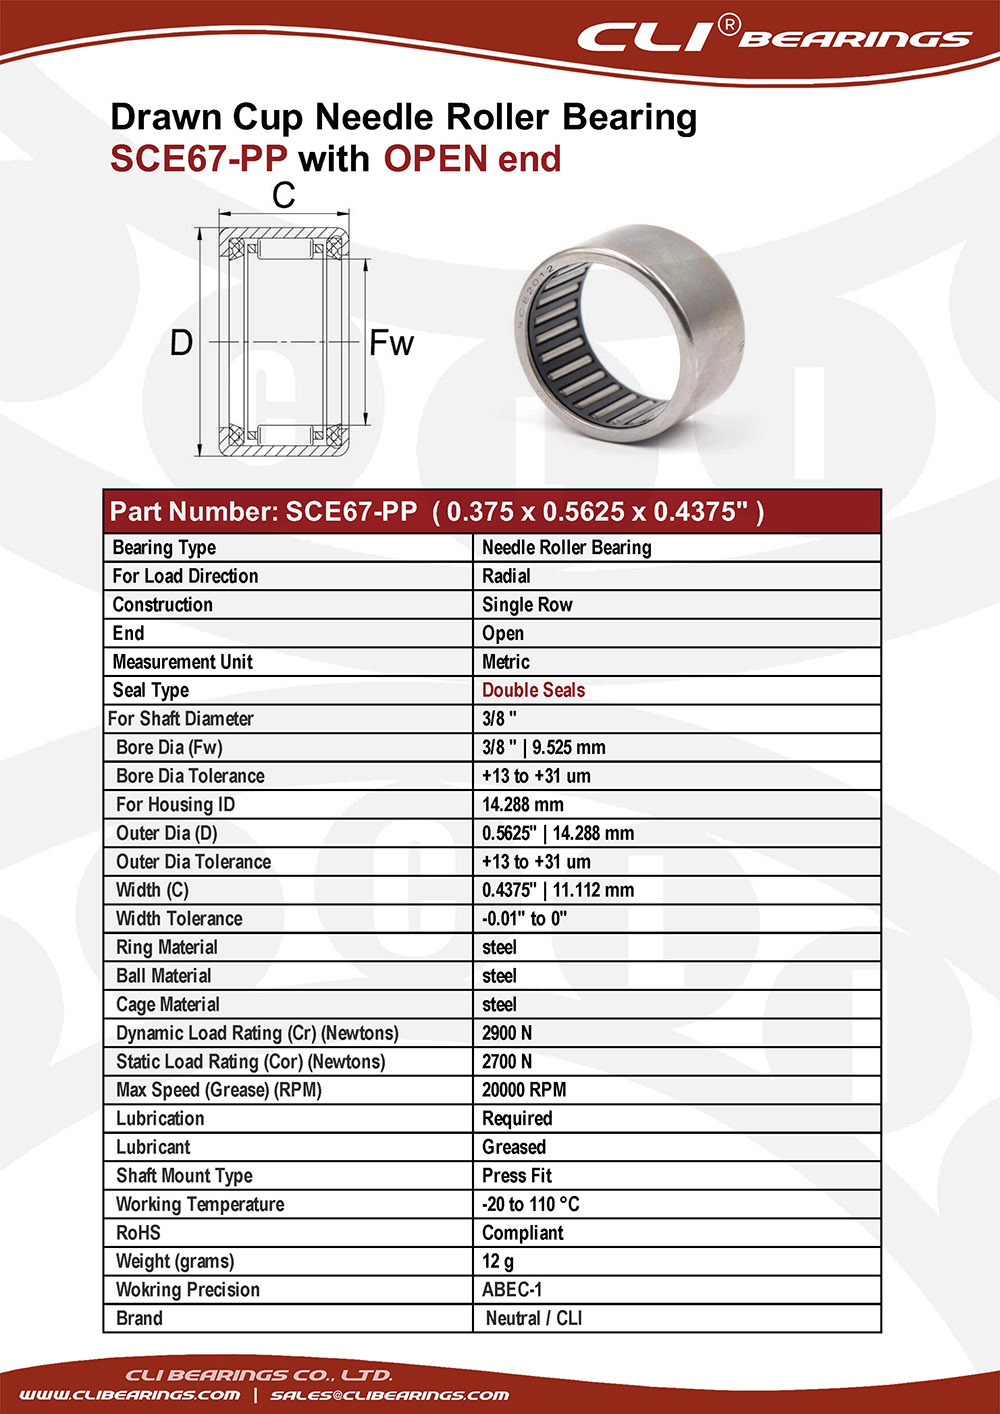 Original sce67 pp 0 375x0 5625x0 4375 drawn cup needle roller bearings with double seals   cli bearings co ltd nw